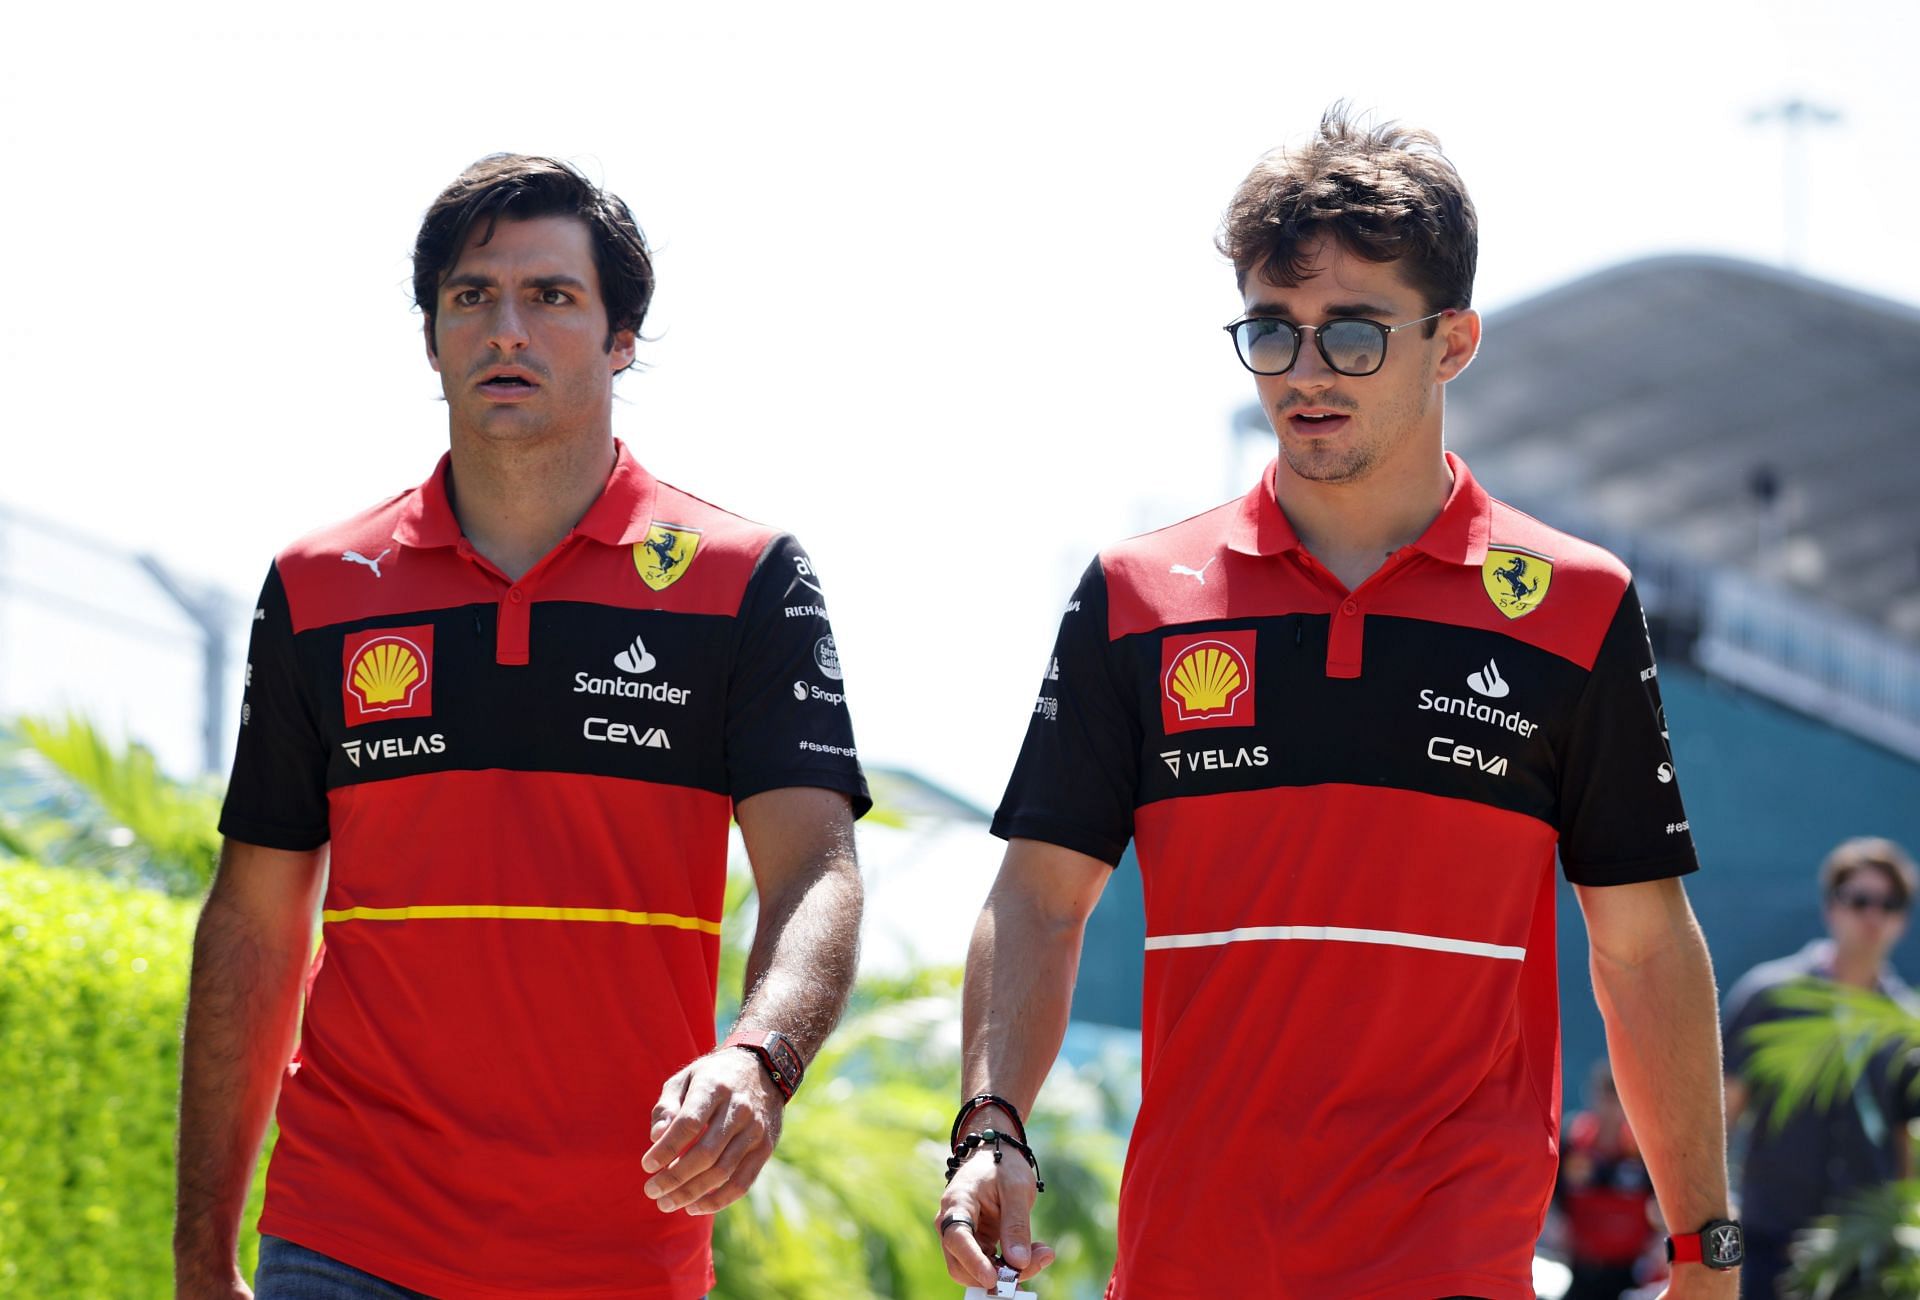 Carlos Sainz (left) with Charles Leclerc (right) at the F1 Grand Prix of Miami - Practice